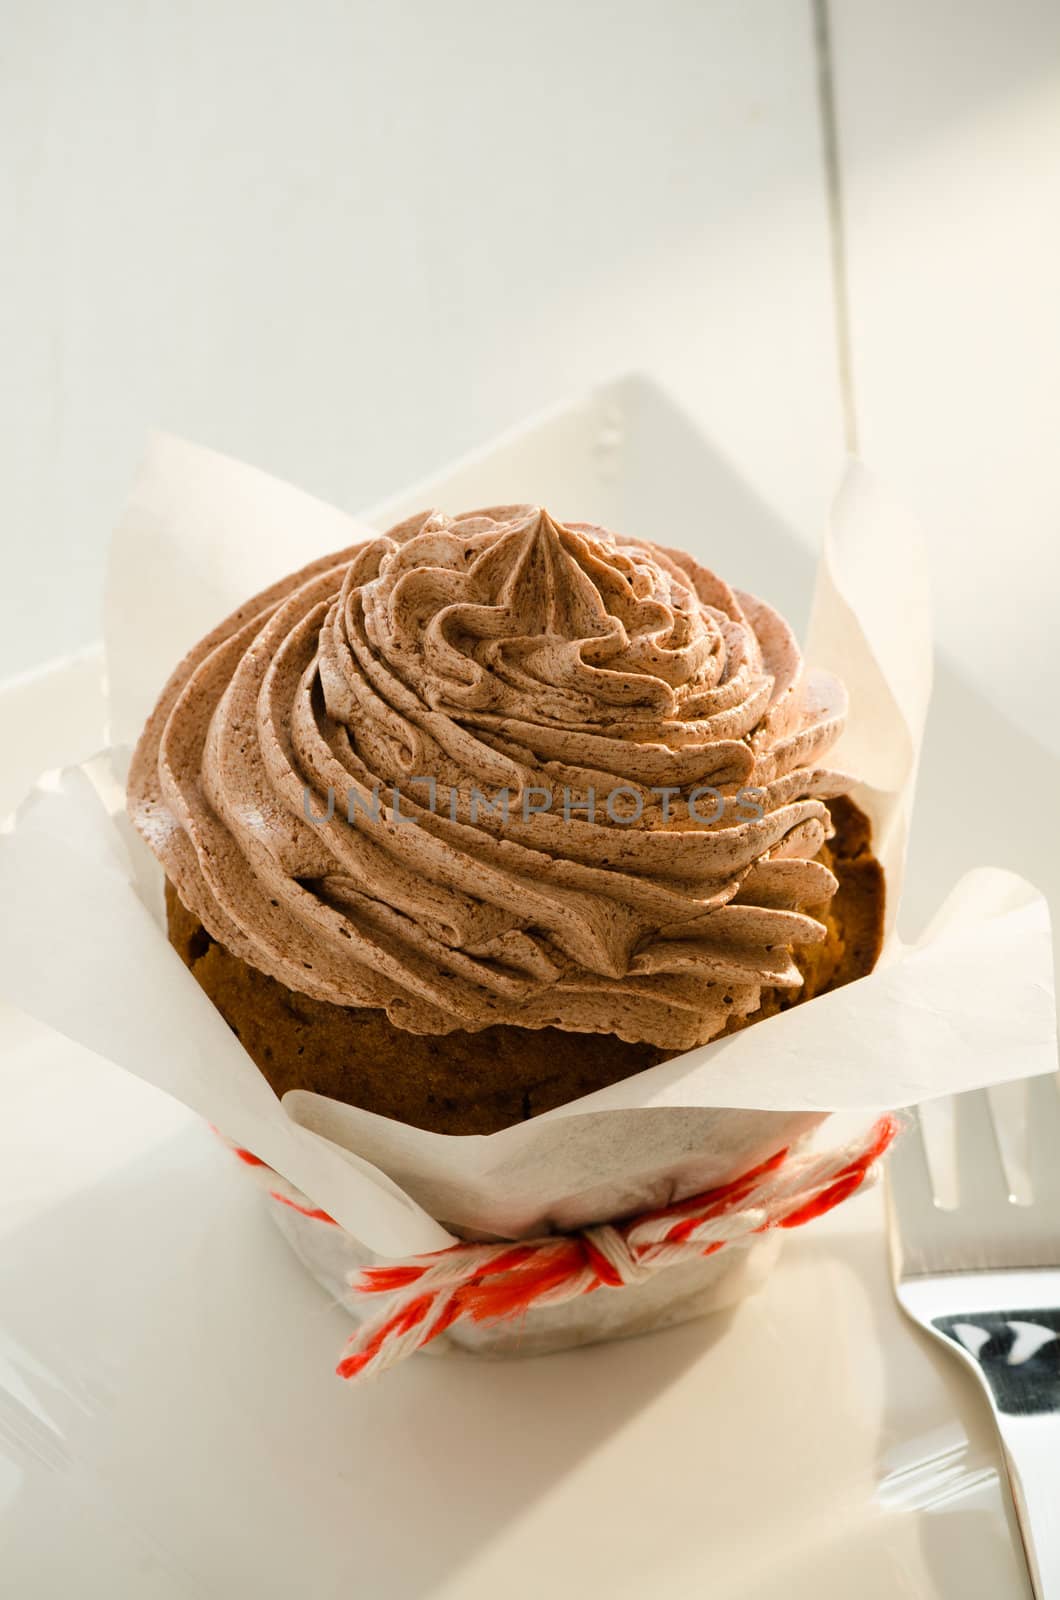 A chocolate cupcake on white plate and fork